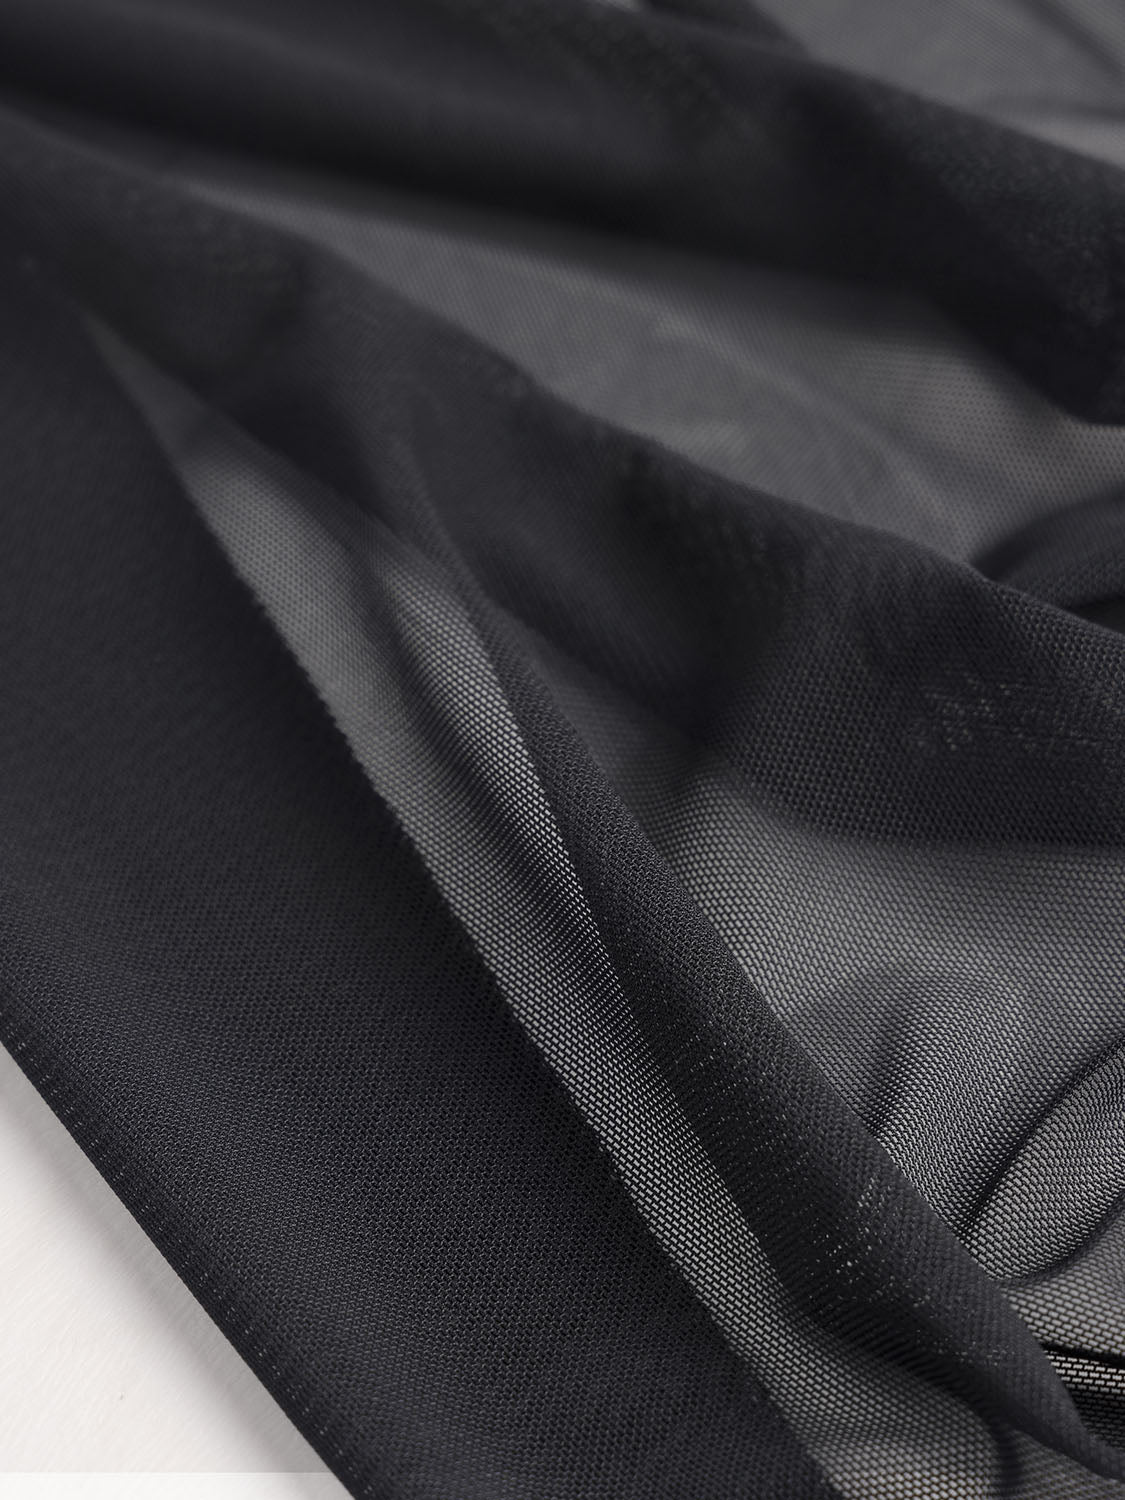 ♻️Poly Recycle Solid Black Matte Polyester Spandex Fabric 4 Way